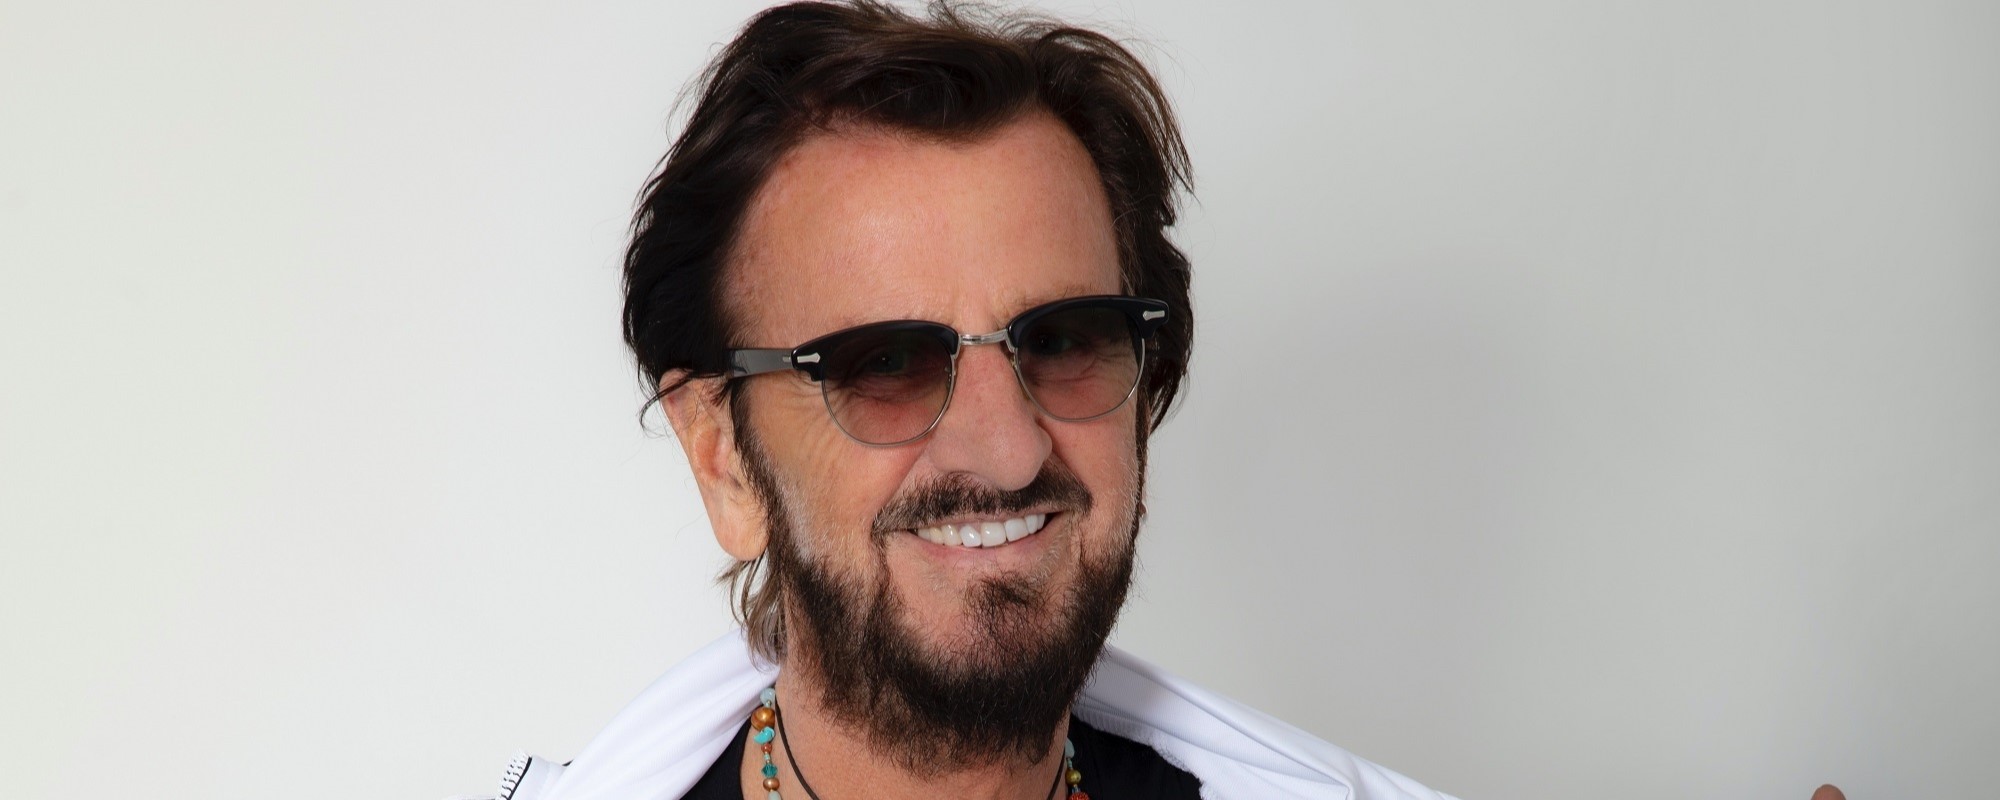 “Bongos on a Country Record?”: Ringo Starr Shares Some New Details About His Upcoming Album